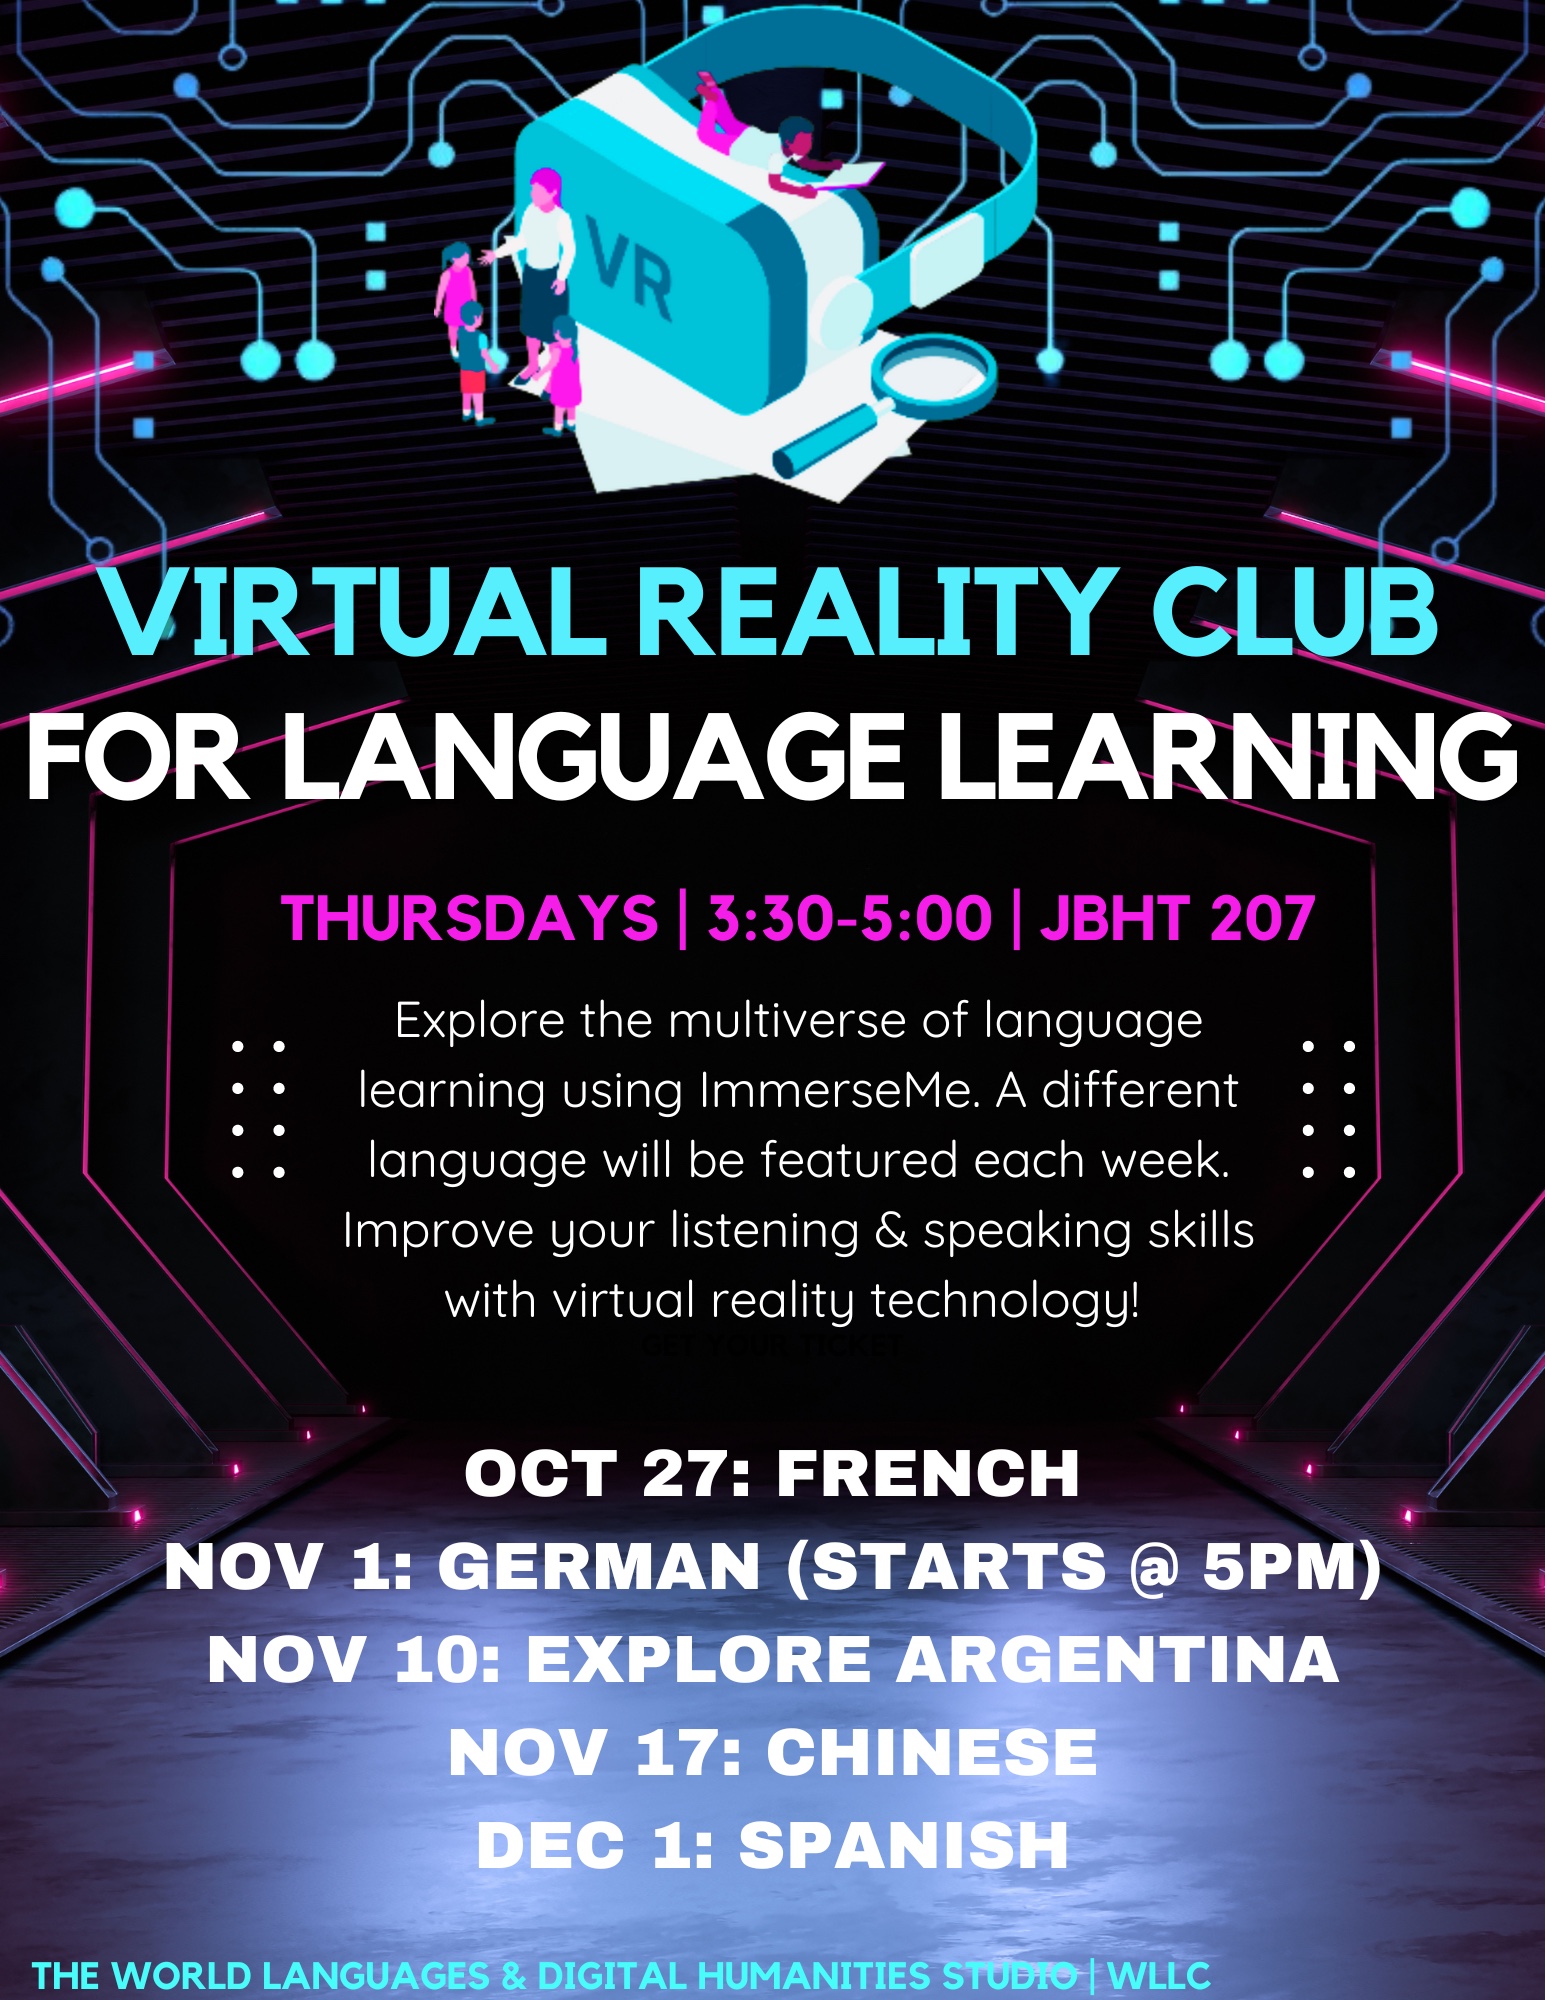 VR Club for Language Learning, Thursdays, 3:30-5:00 PM